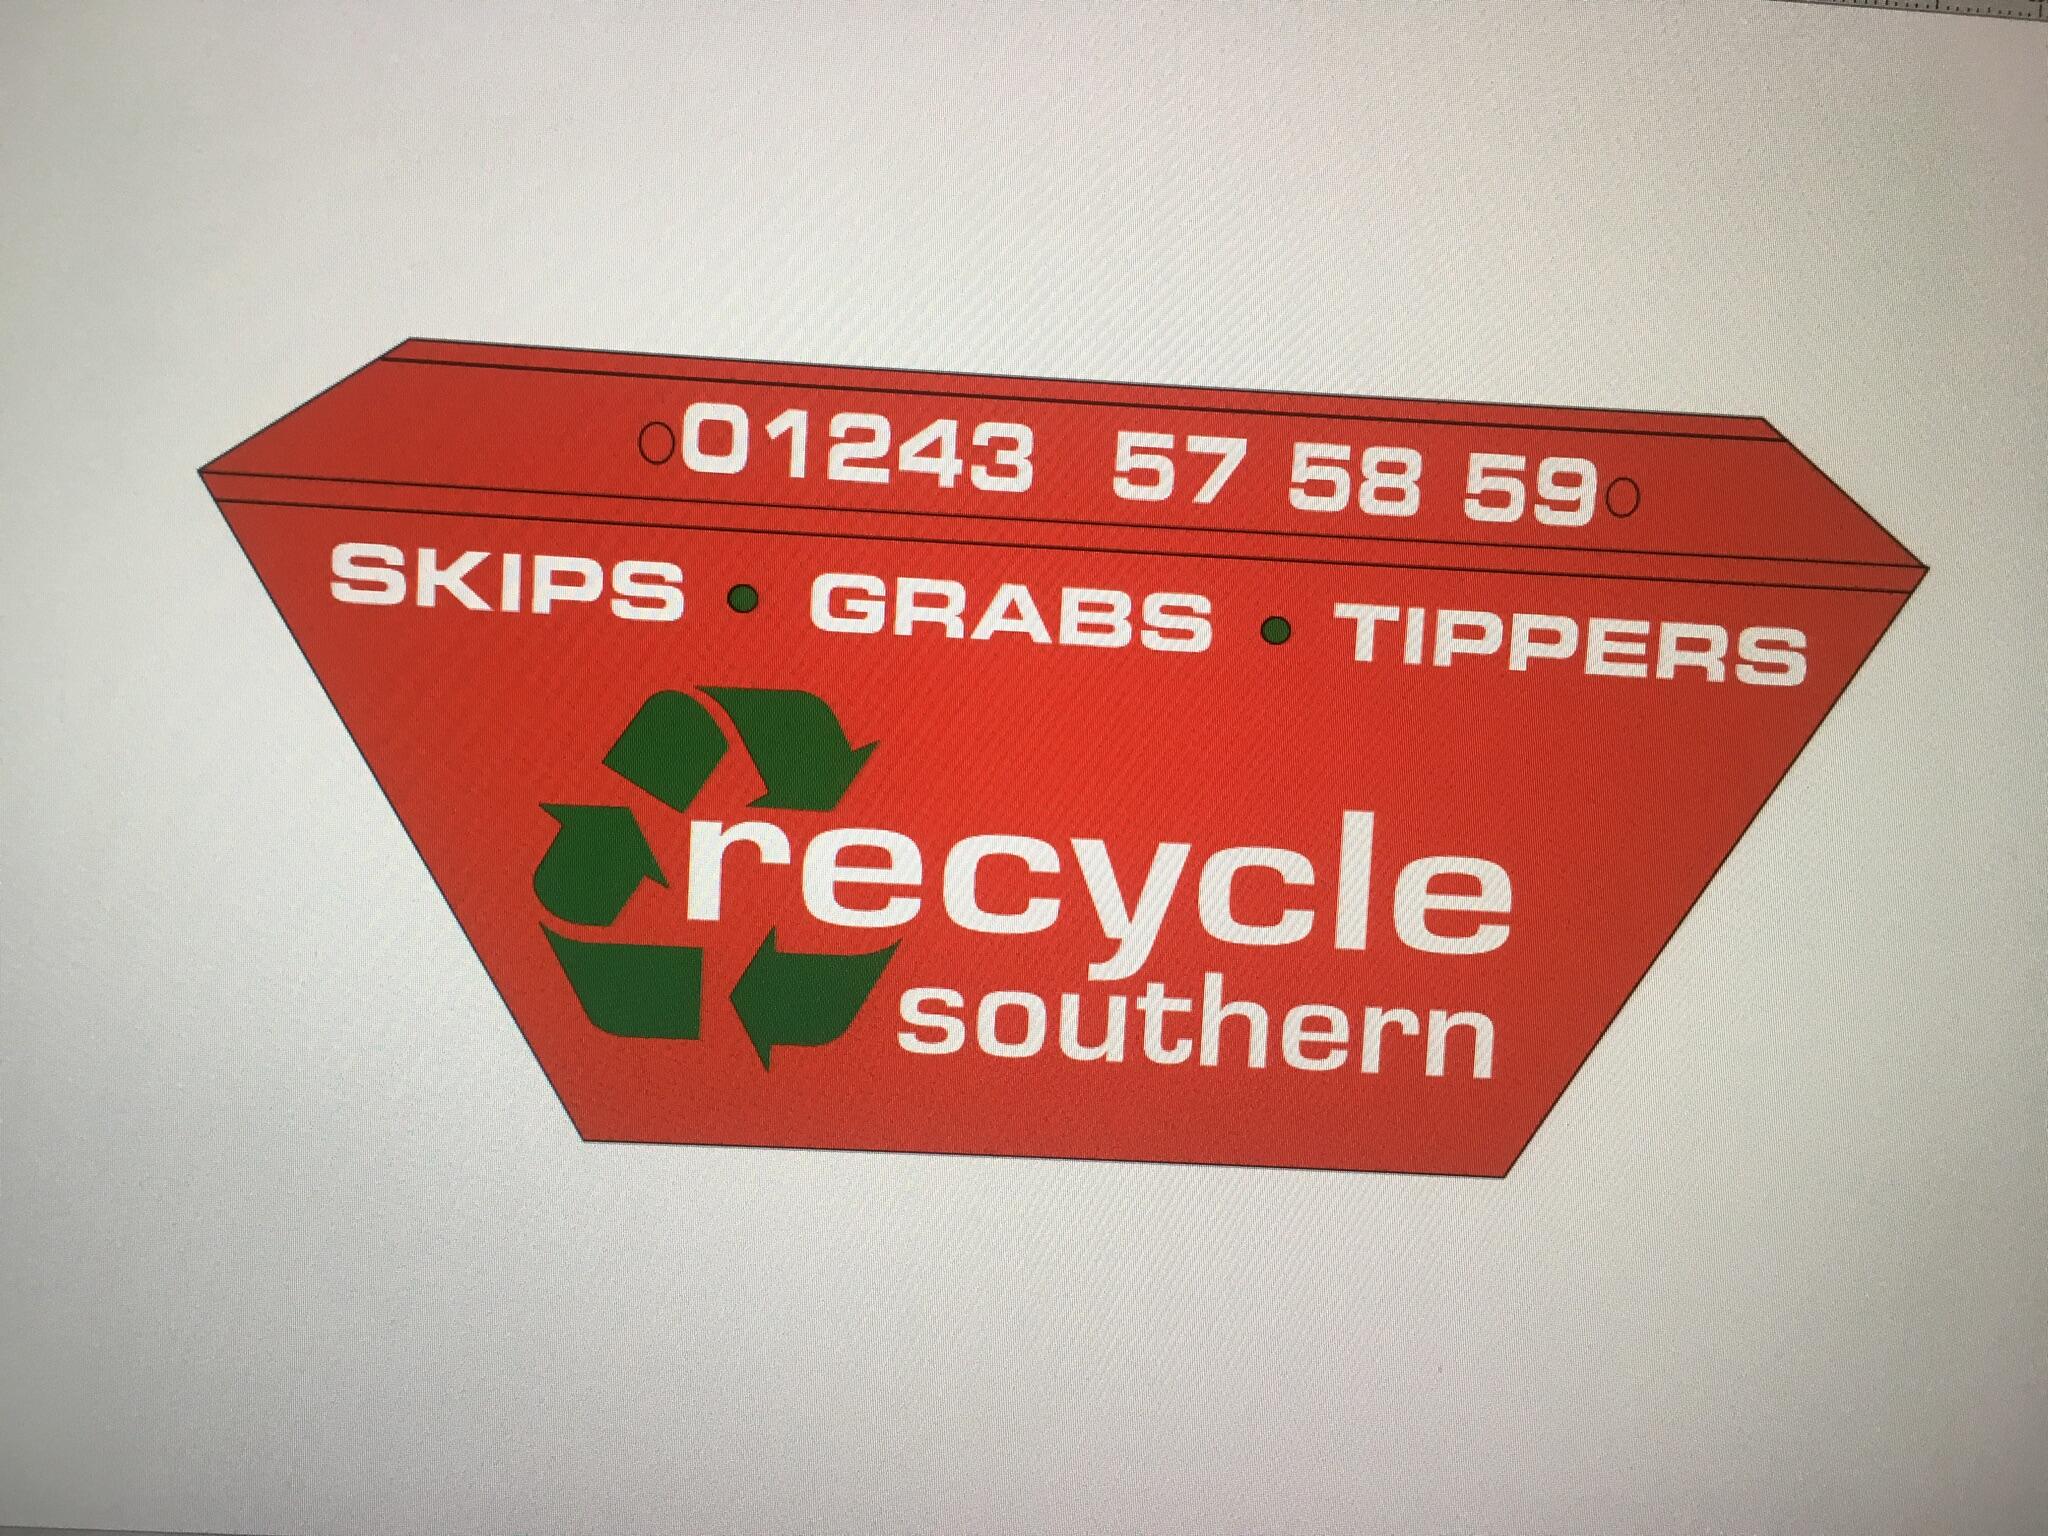 Recycle Southern Ltd Skip Hire And Grab Hire Bognor Regis GB ENG